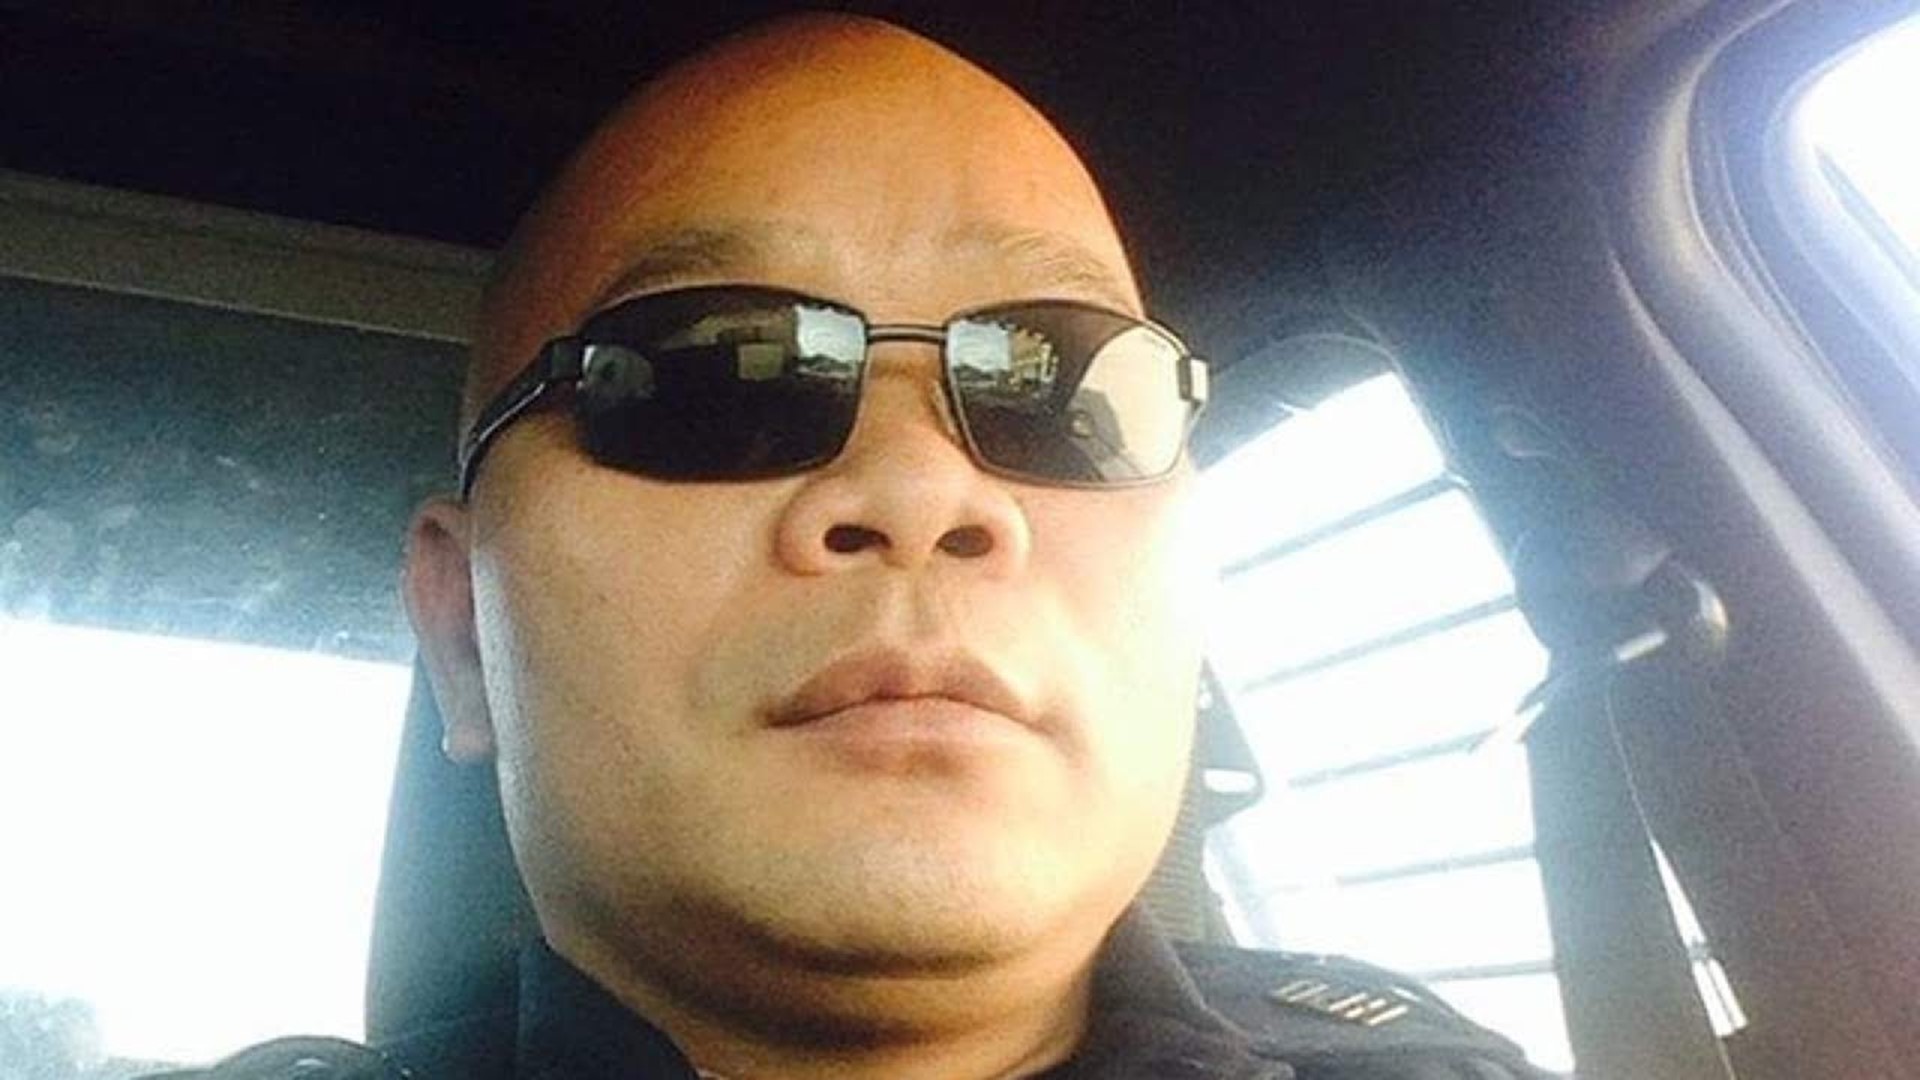 Tam Dinh Pham resigned from the Houston Police Department after the police chief received a tip about his involvement on January 6.